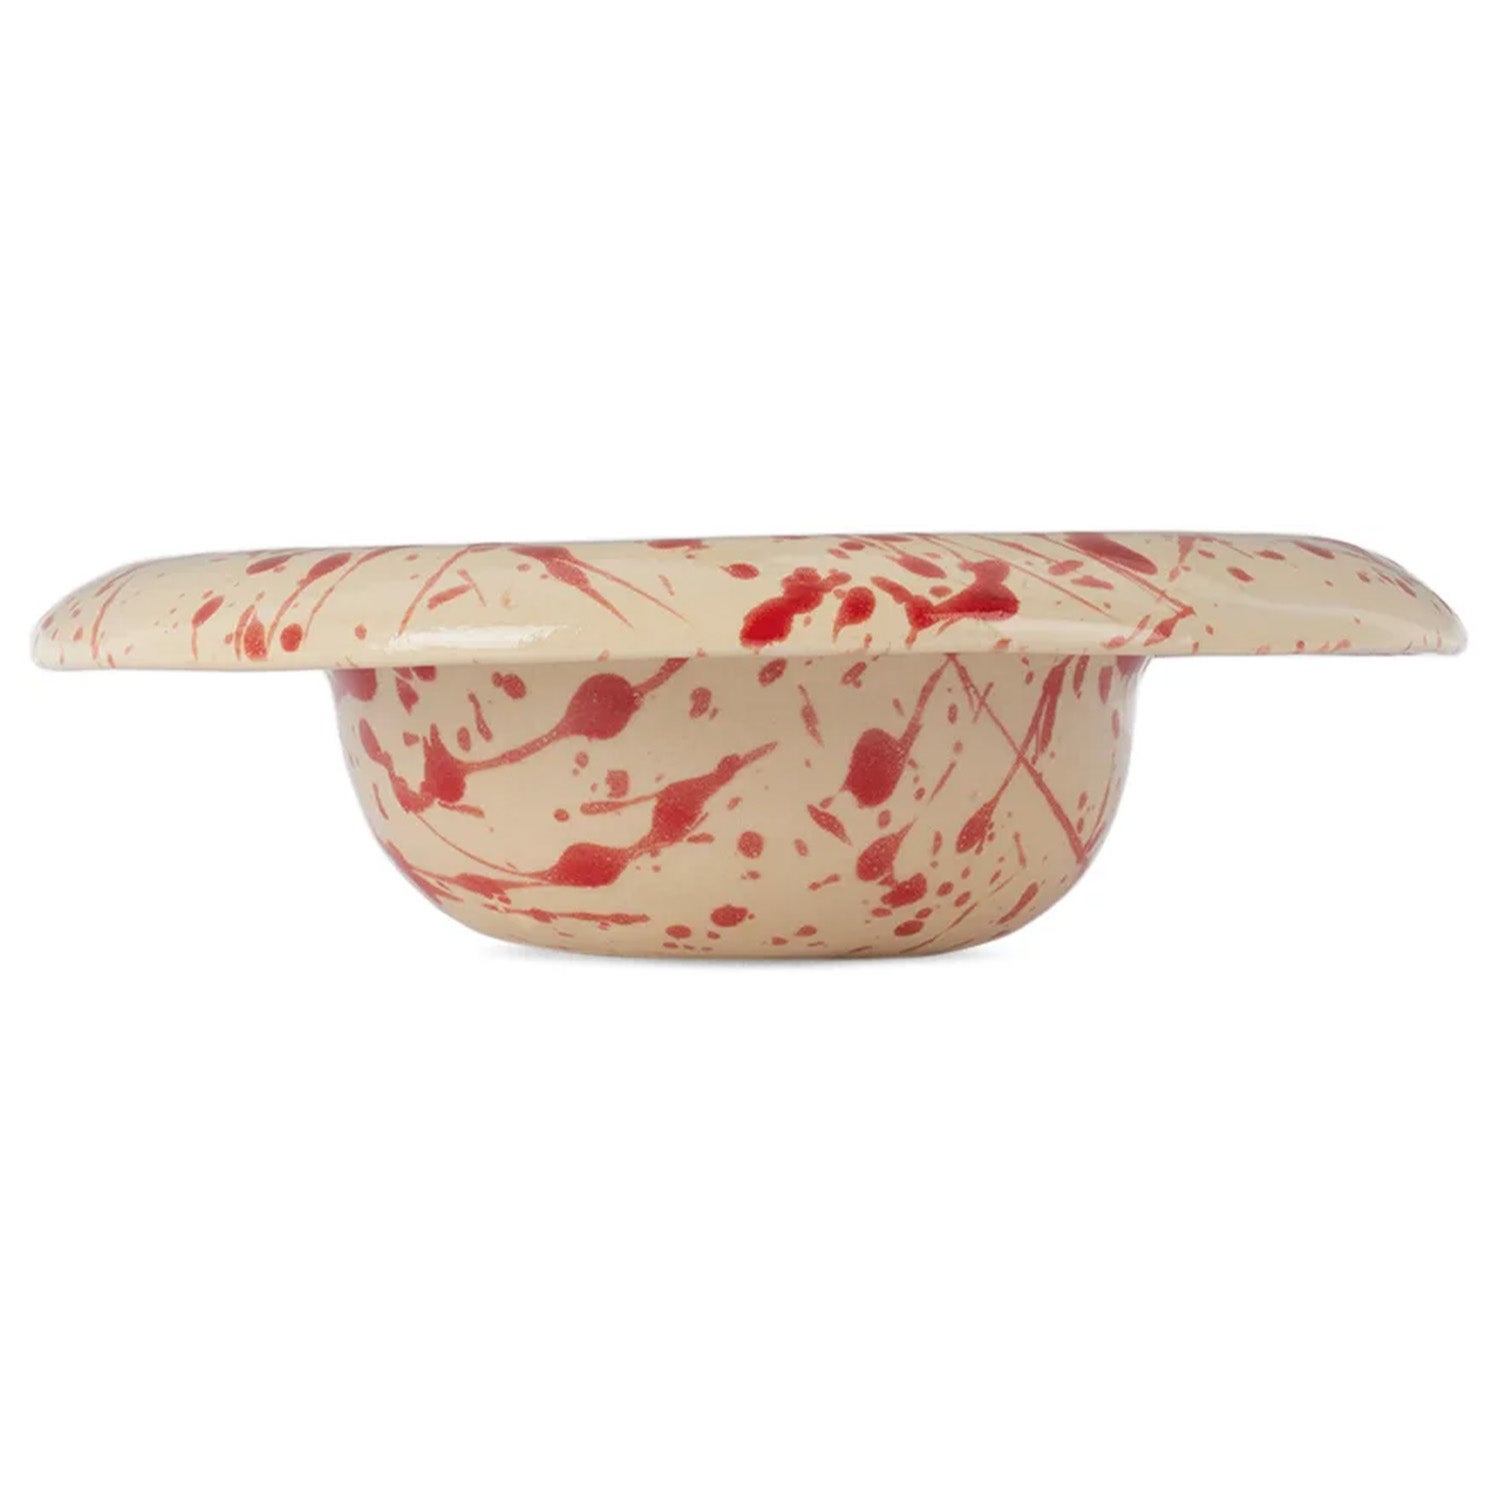 BOMBAC Off-White & Red Big Bowl